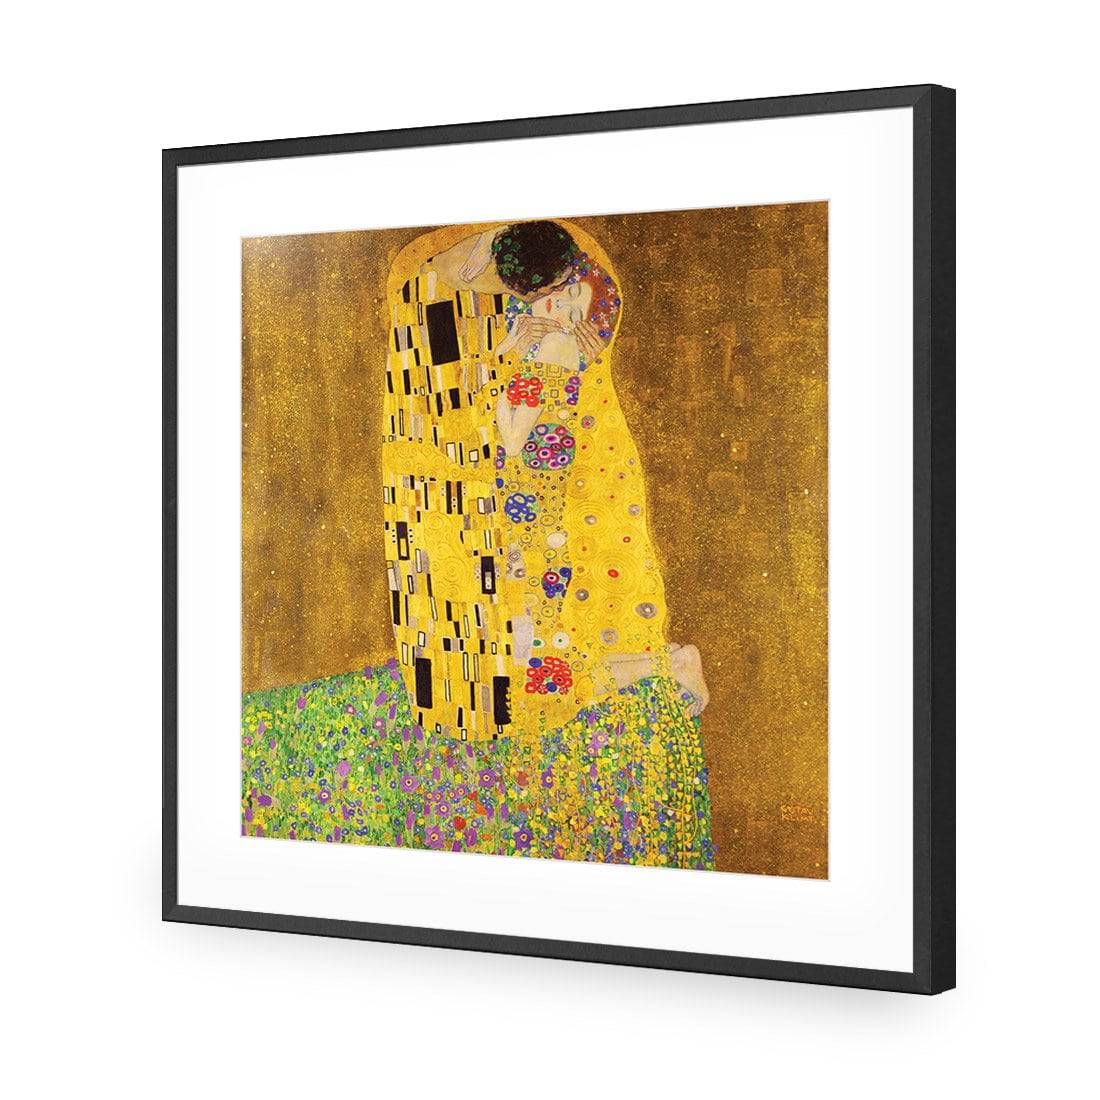 The Kiss, Square-Acrylic-Wall Art Design-With Border-Acrylic - Black Frame-37x37cm-Wall Art Designs